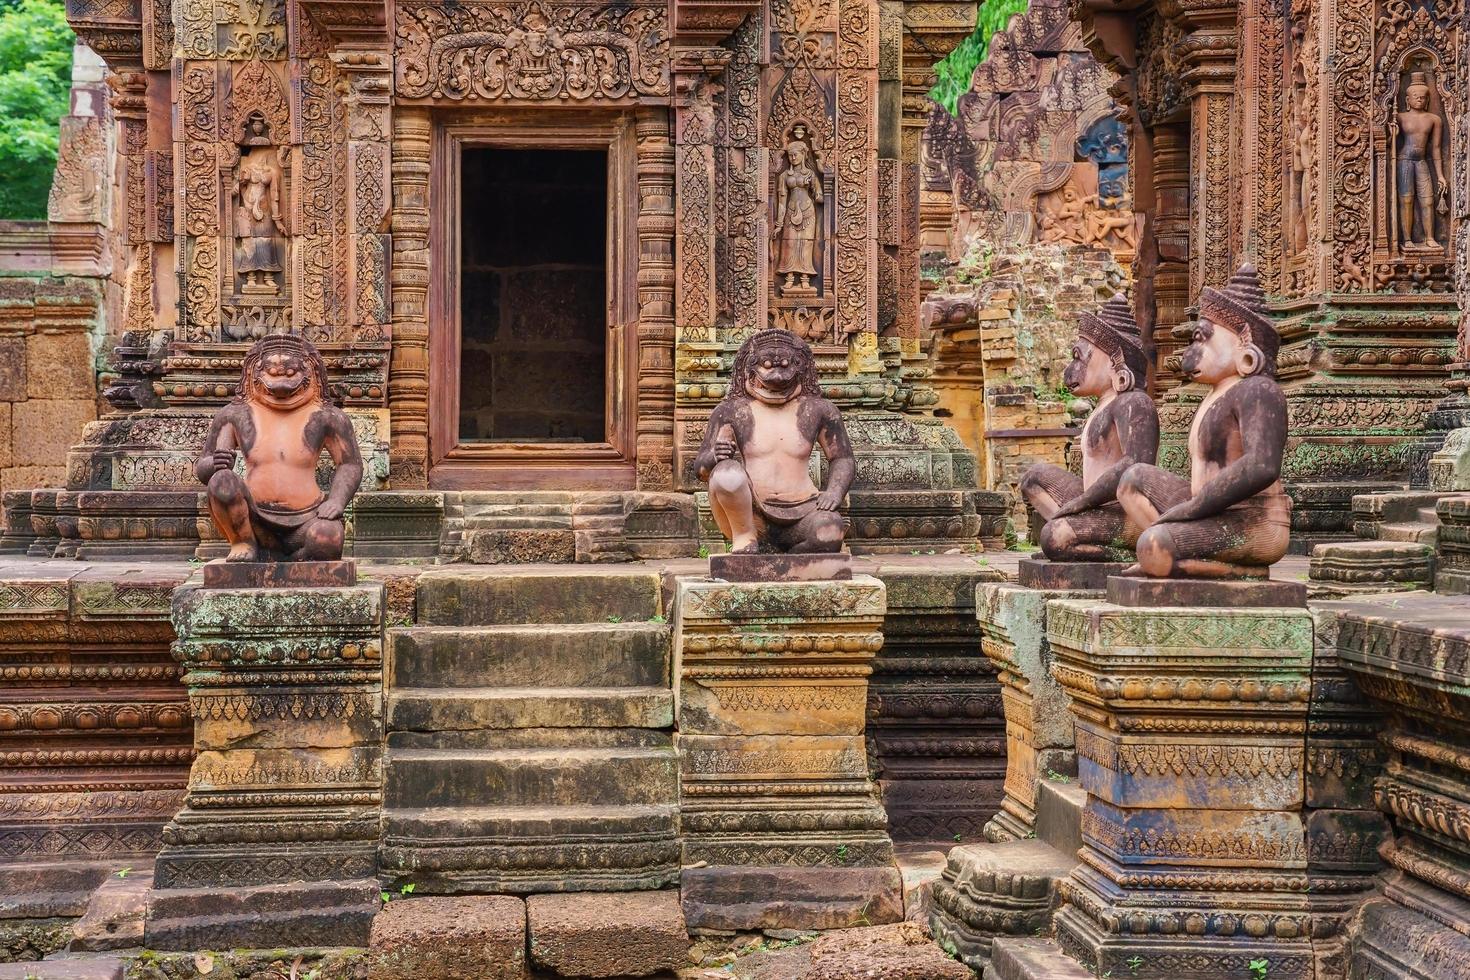 Lion and Monkey Statues at Banteay Srei Red Sandstone Temple, Cambodia photo